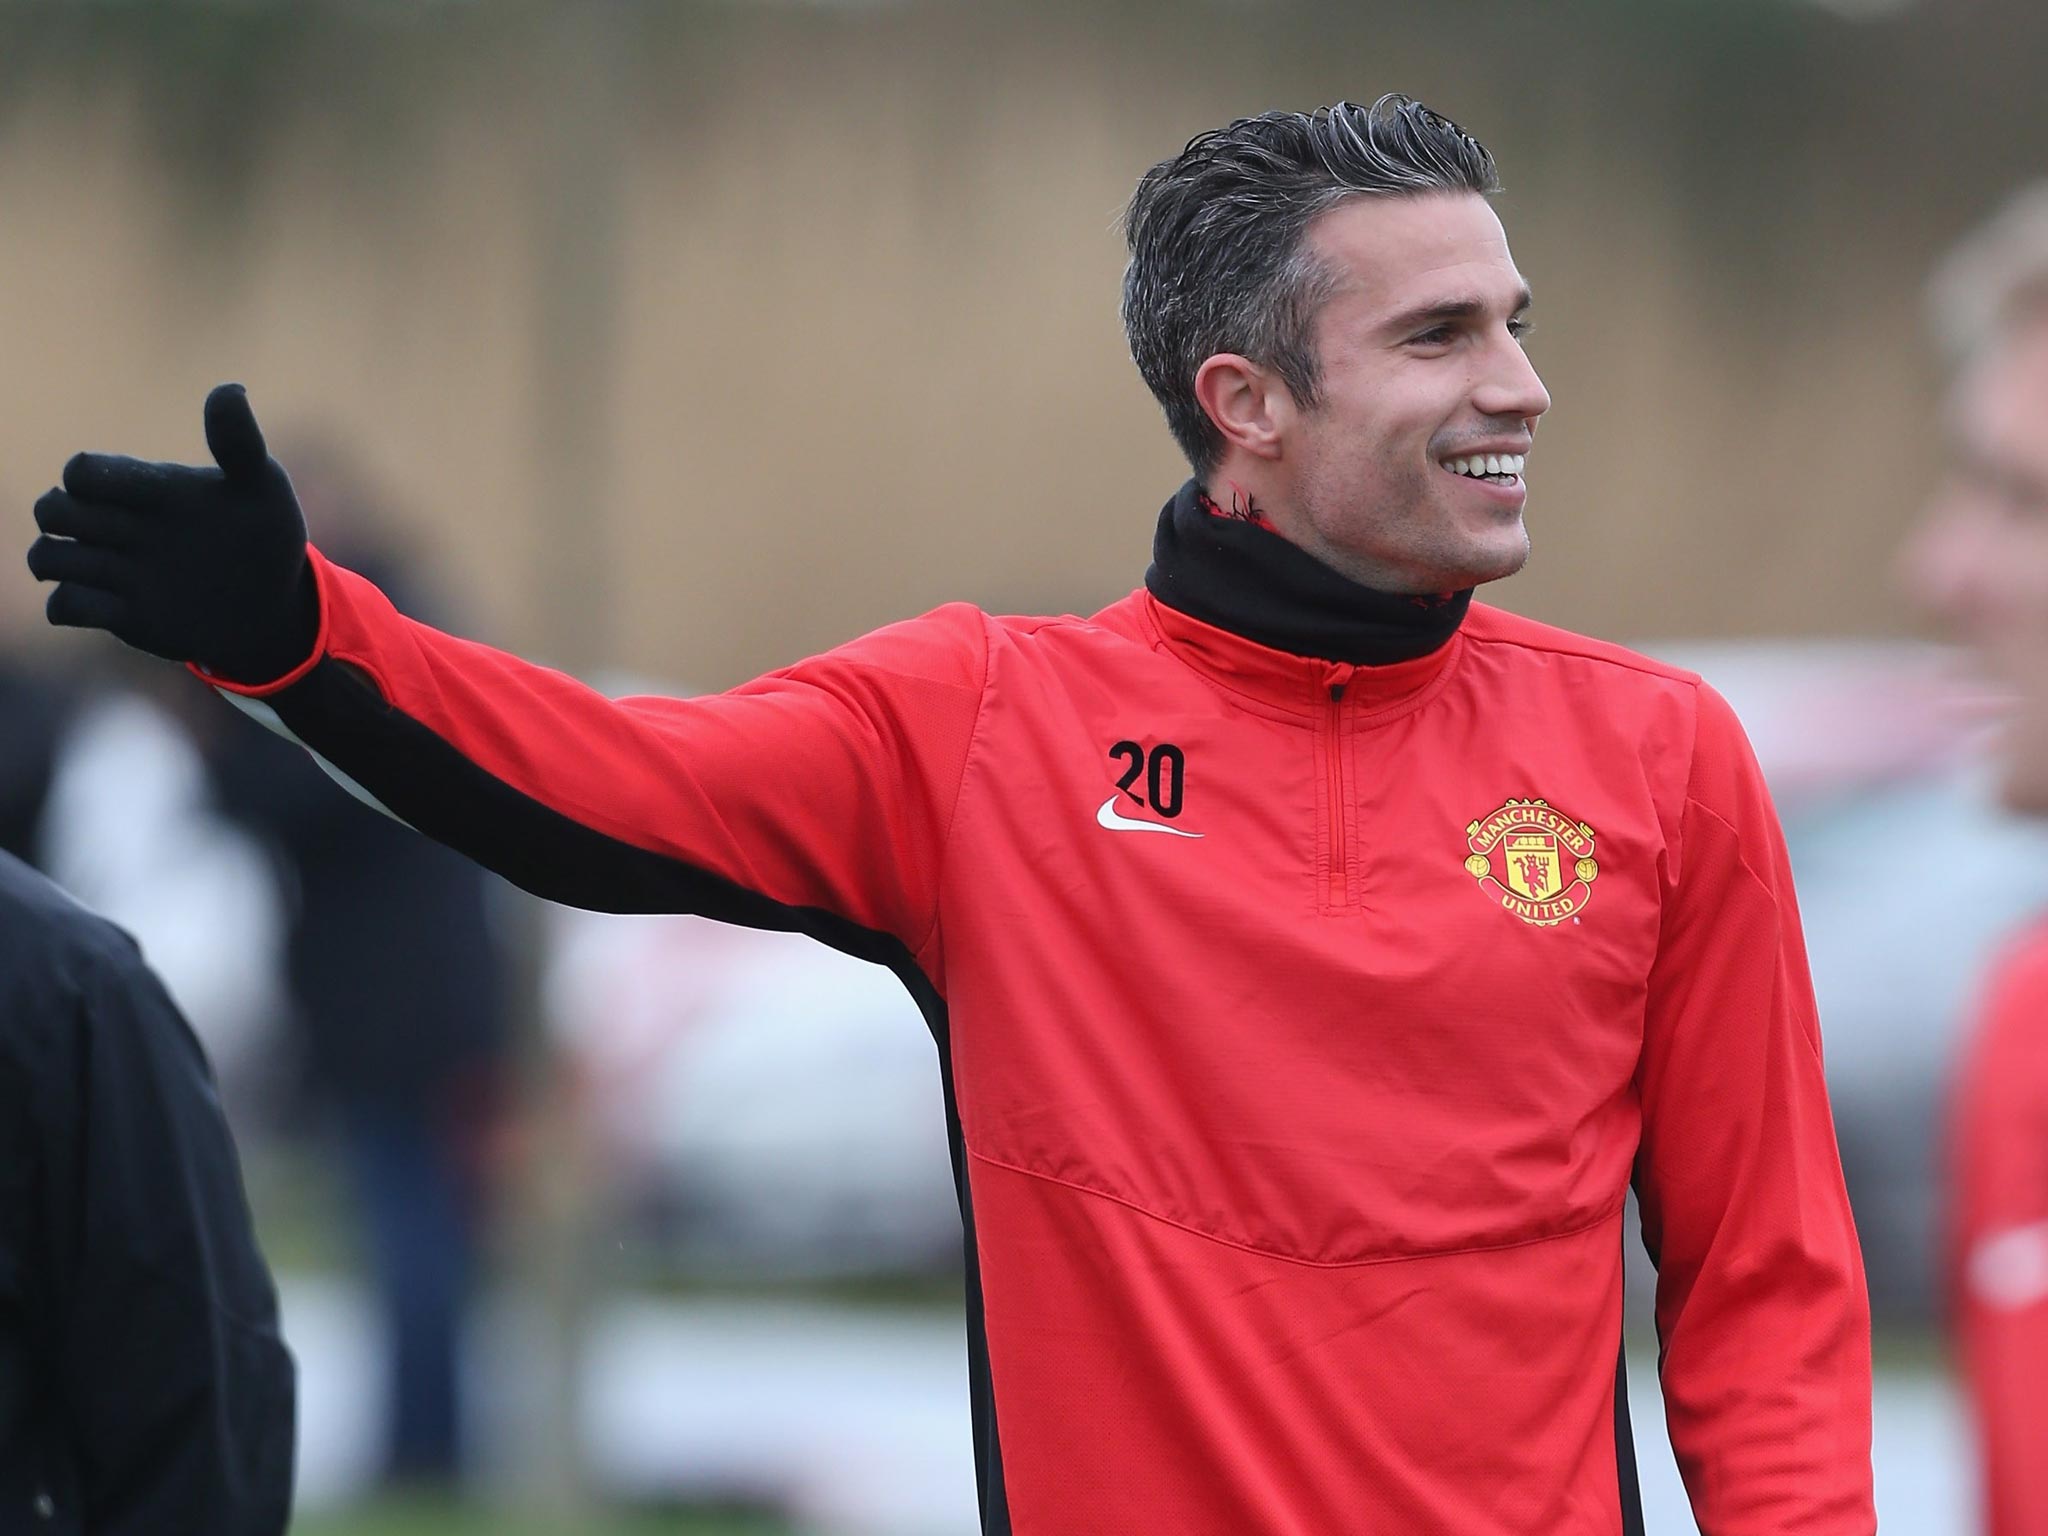 Robin van Persie is expected to be in action for the Netherlands against France